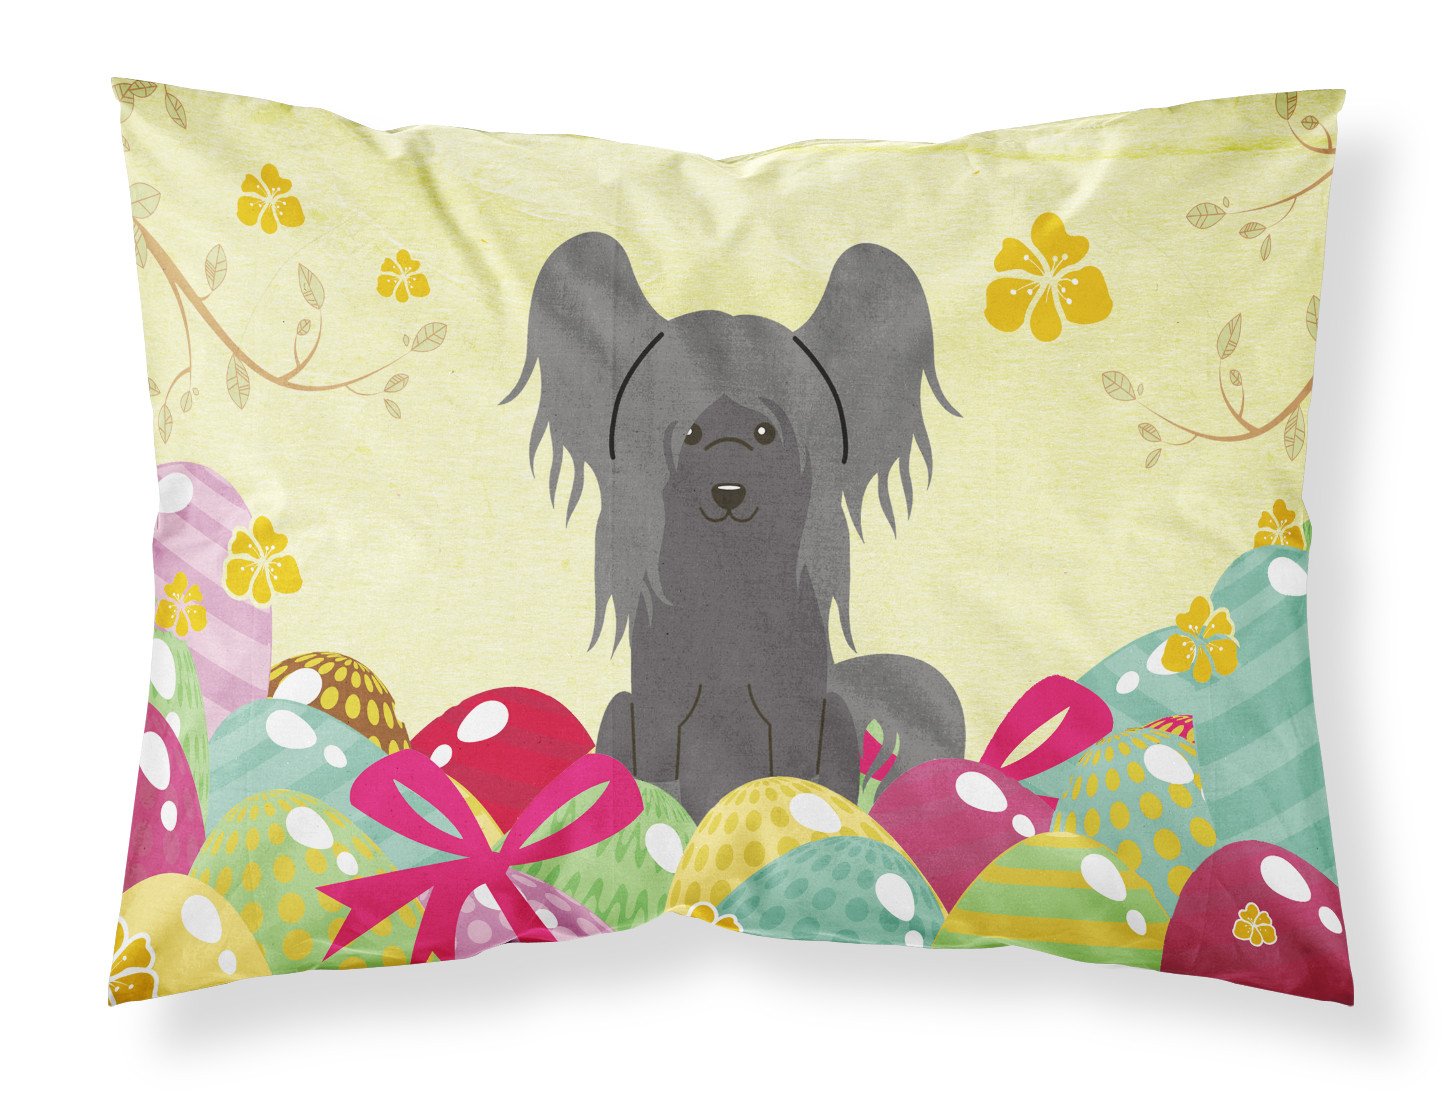 Easter Eggs Chinese Crested Black Fabric Standard Pillowcase BB6112PILLOWCASE by Caroline's Treasures